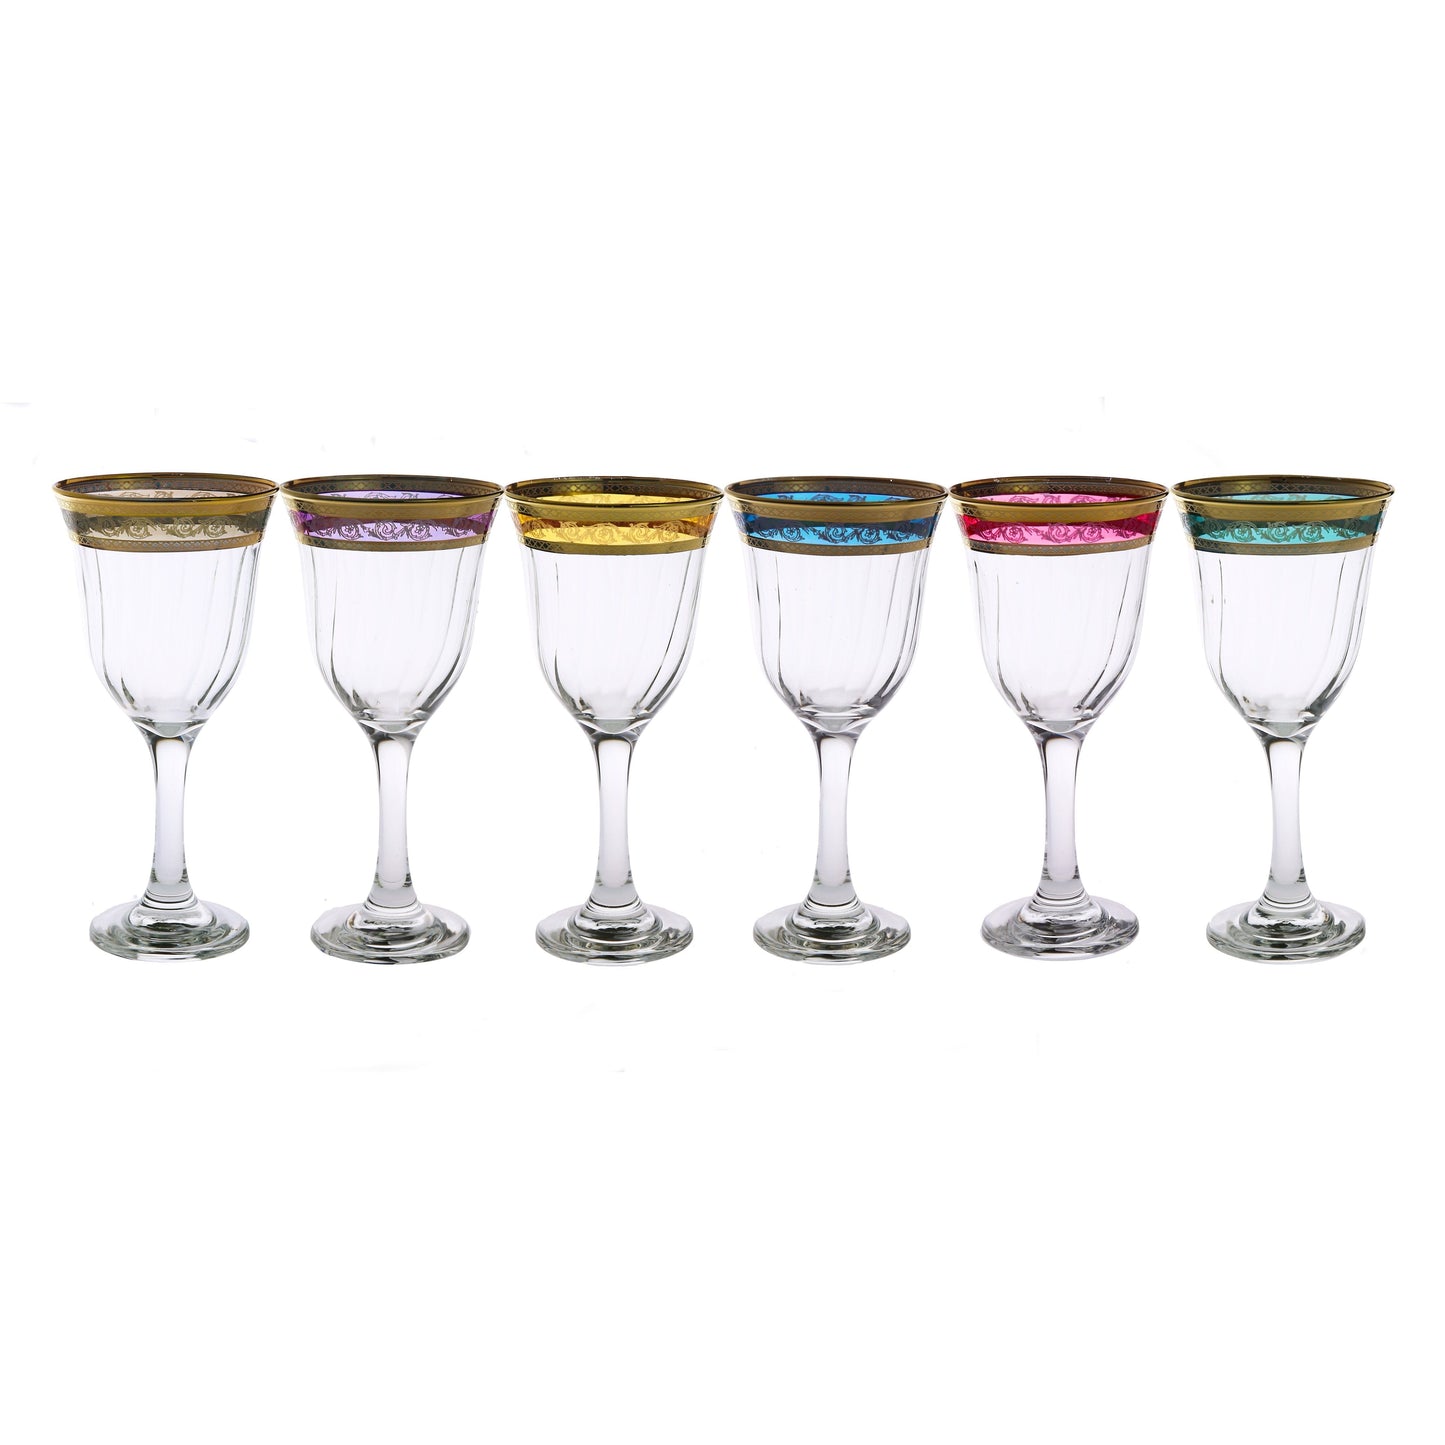 Classic Touch Set Of 6 Assorted Colored Water Glasses With Gold Design, 8"